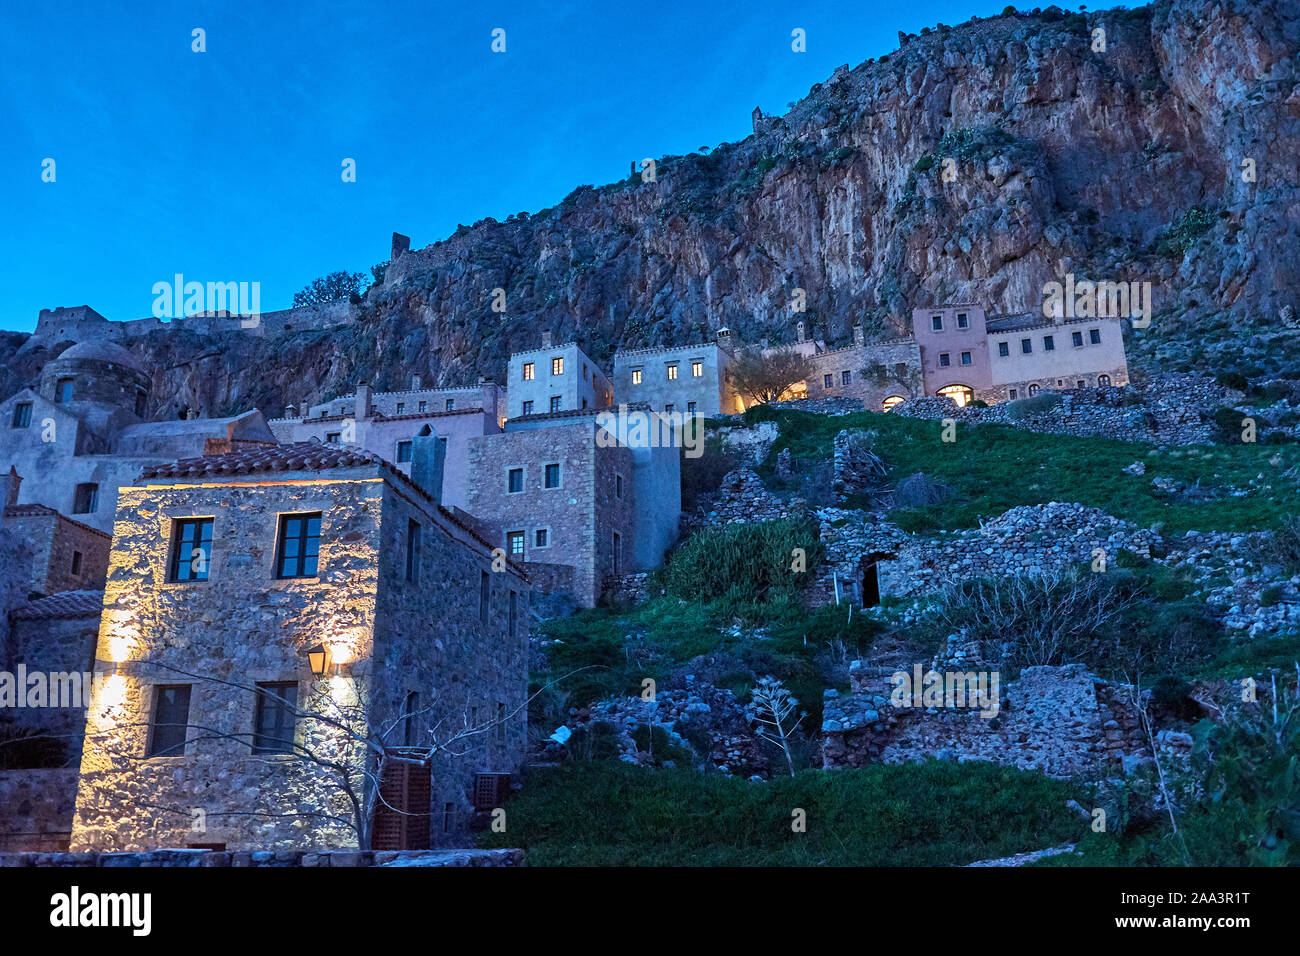 Stone alley into the picturesque castle town of Monemvasia during winter. Architectural stone buildings and beautiful narrow paved streets. Stock Photo